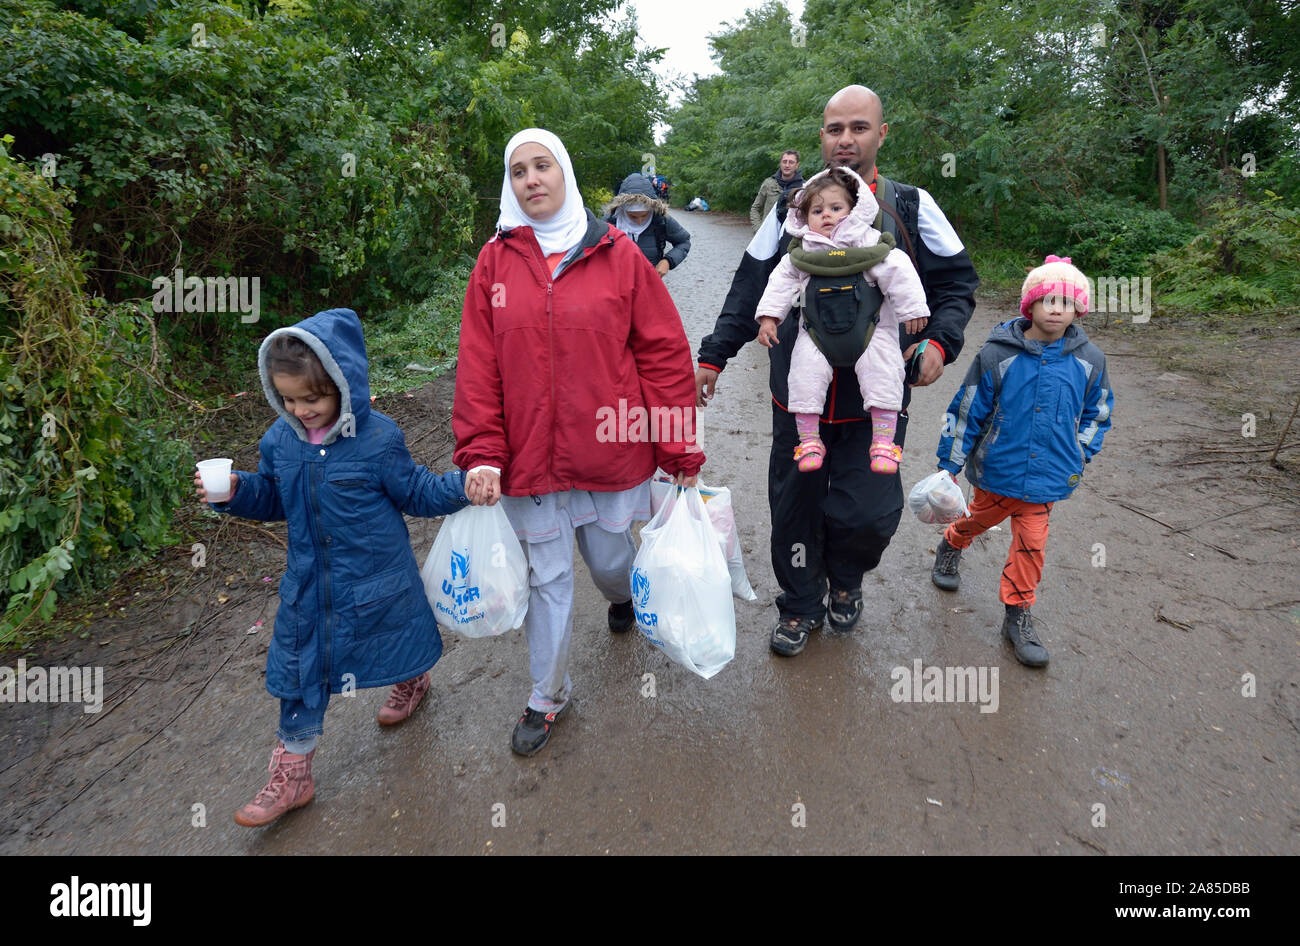 Refugees on their way to western Europe, a family from Damascus, Syria, approaches the border into Croatia near the Serbian village of Berkasovo. Stock Photo